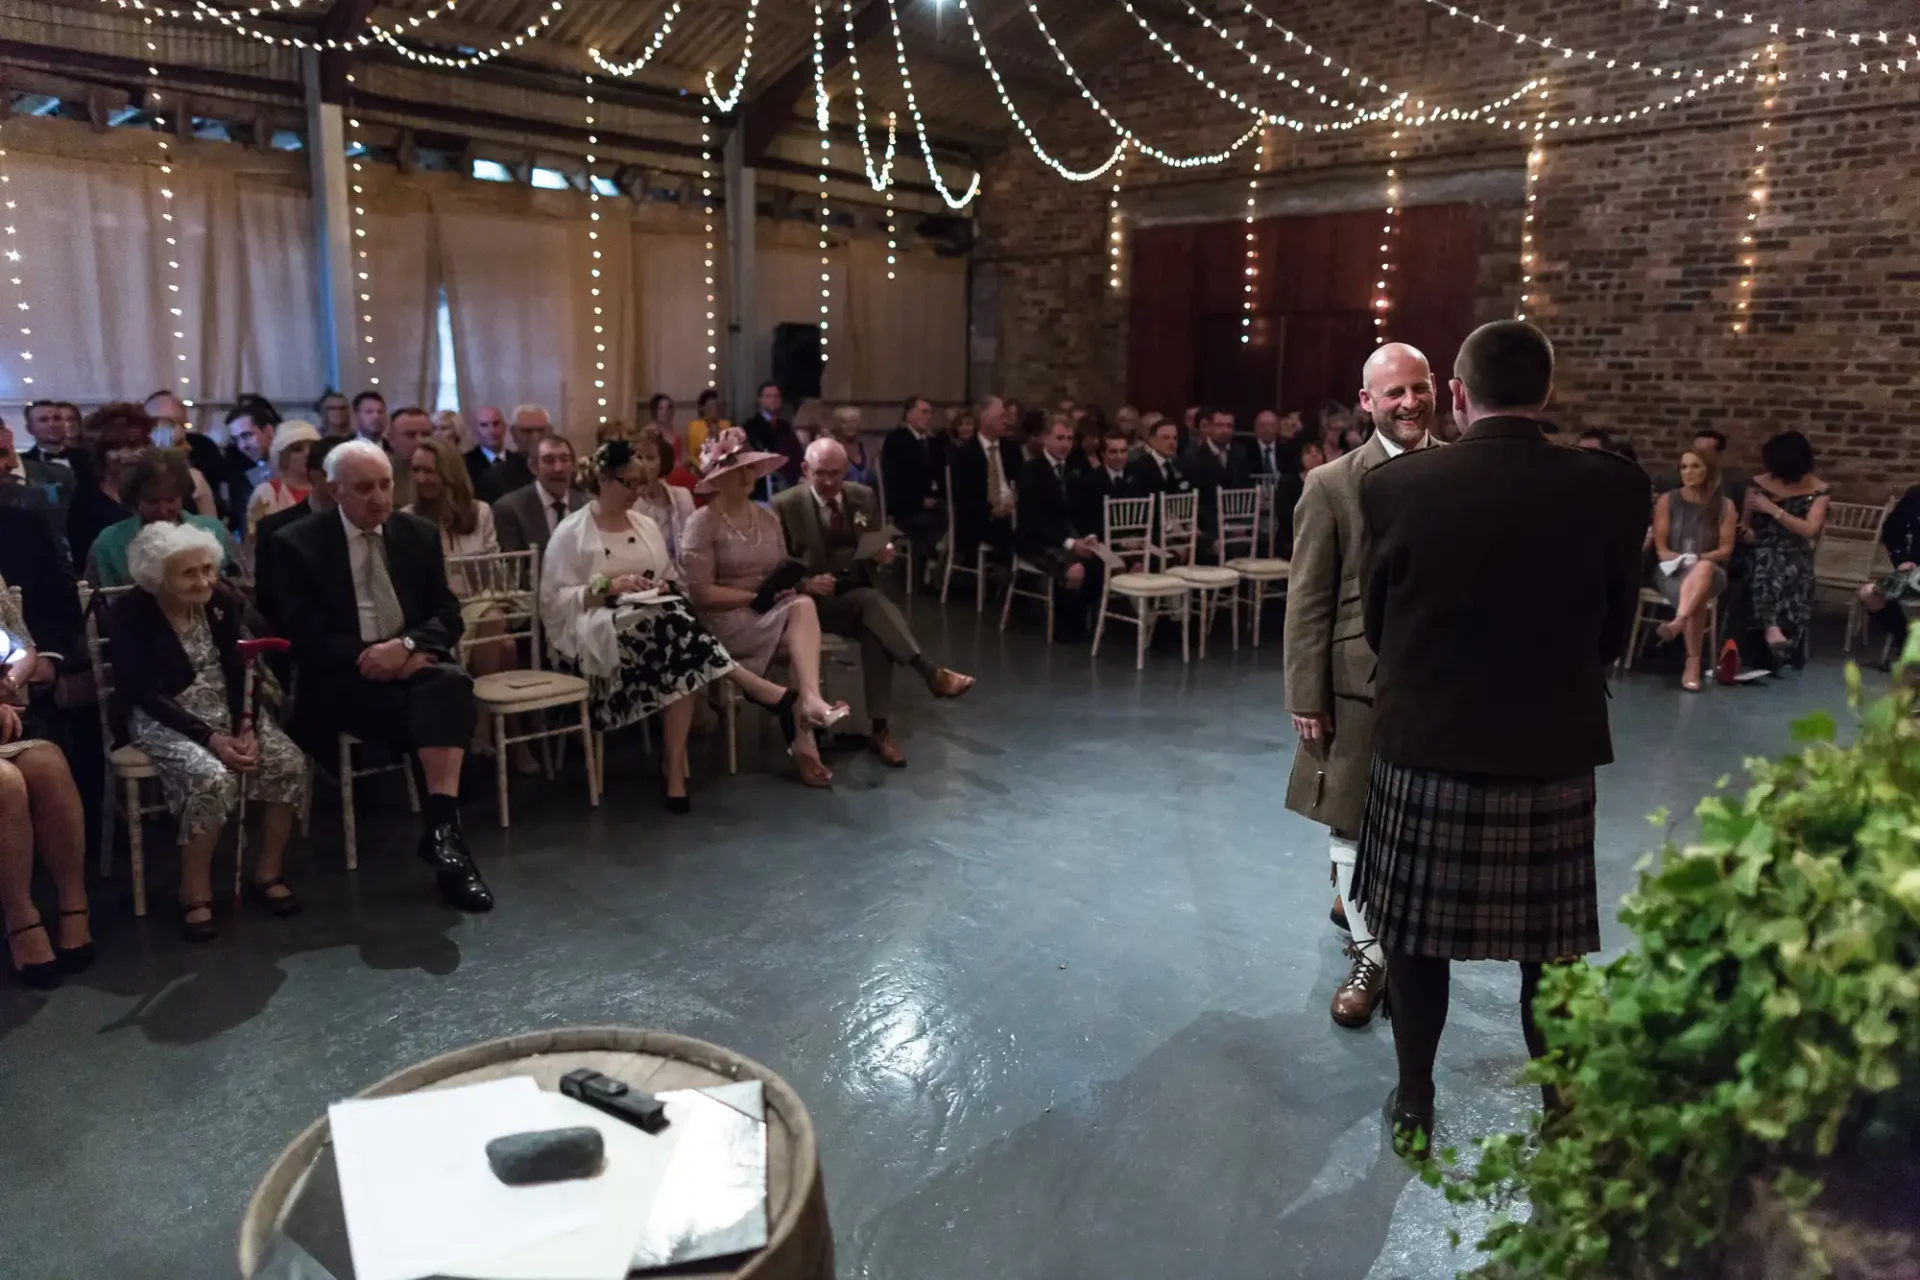 A wedding reception in a rustic venue with guests watching two men in suits, one wearing a kilt, smiling at each other near a microphone stand.